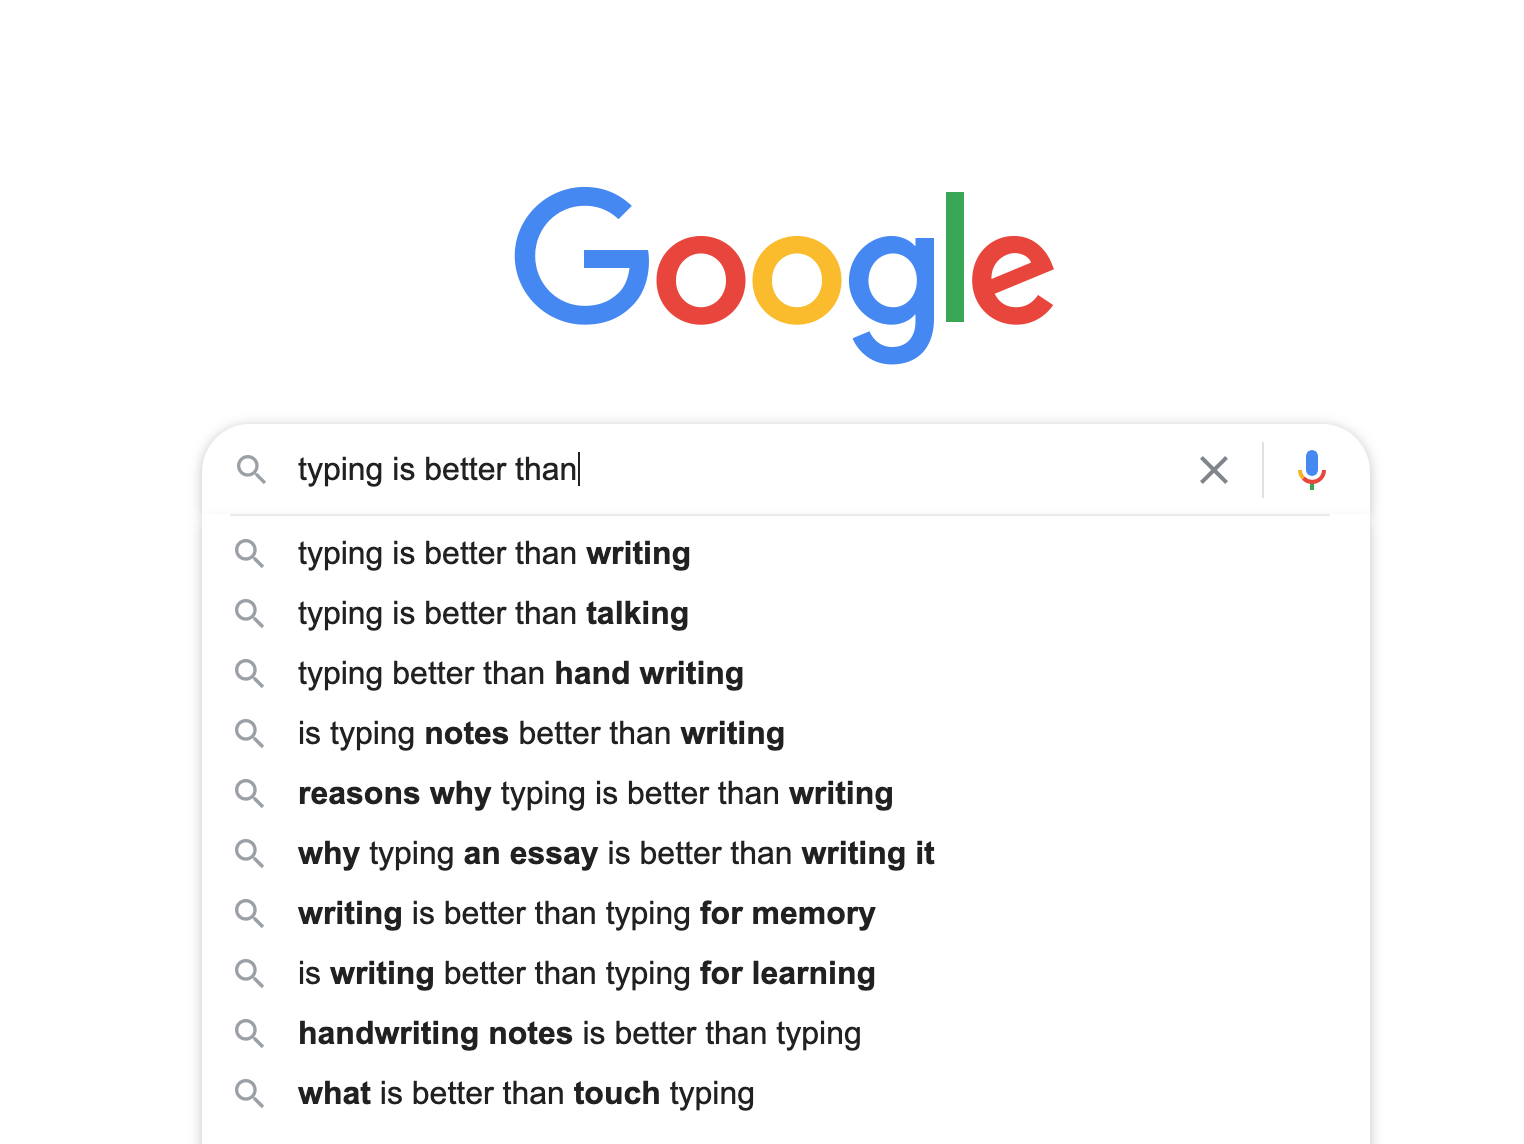 Is typing better than handwriting?